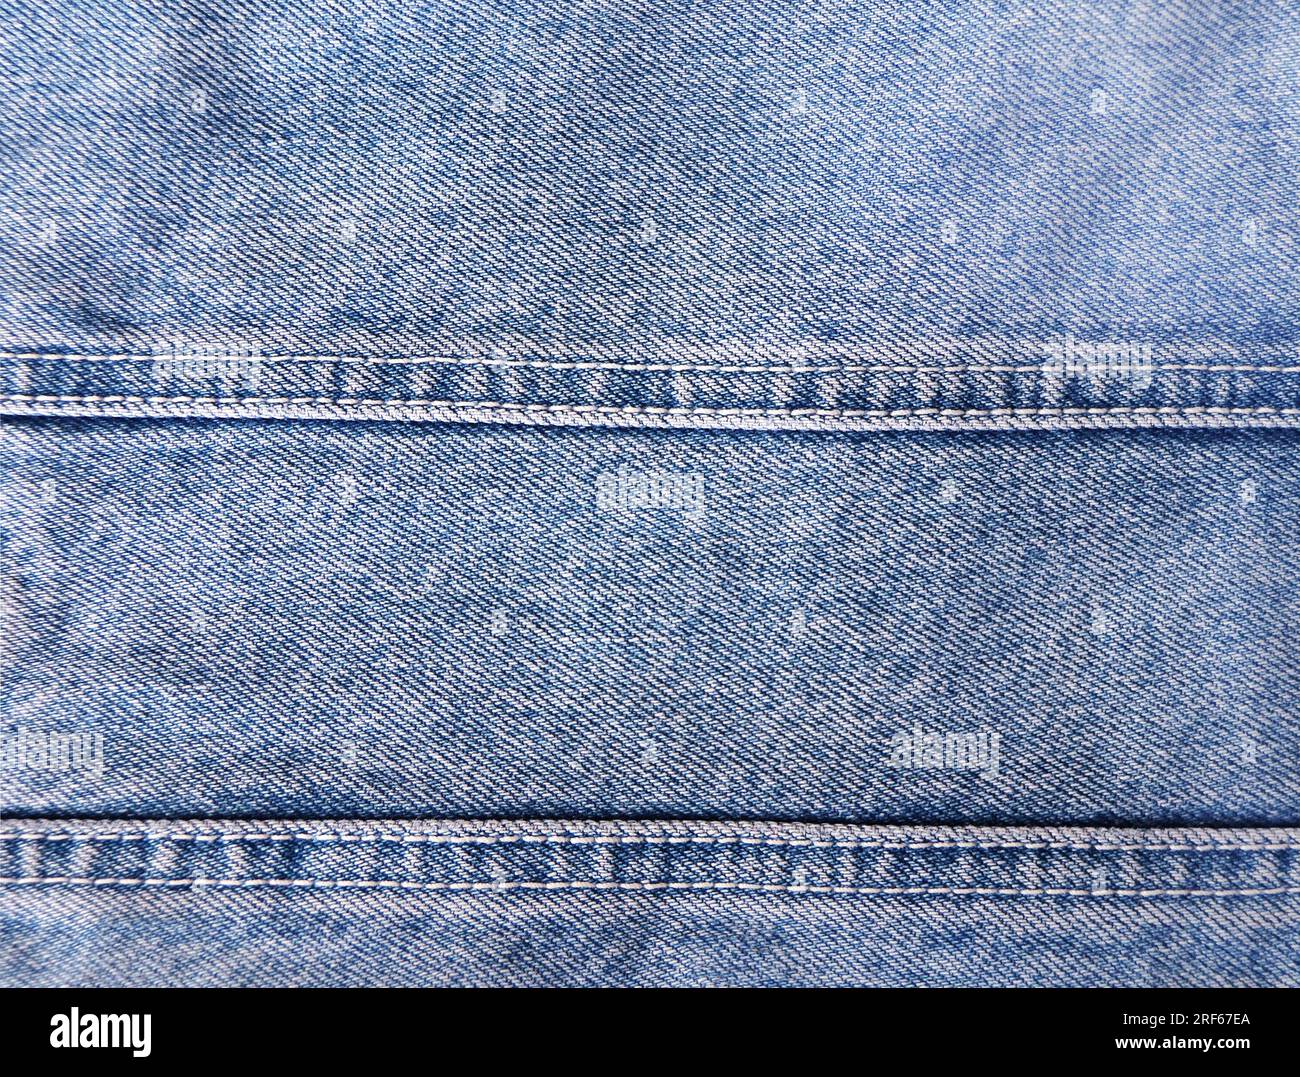 Blue denim background with a seam. Light blue color denim jeans fabric texture. Copy space for text Stock Photo